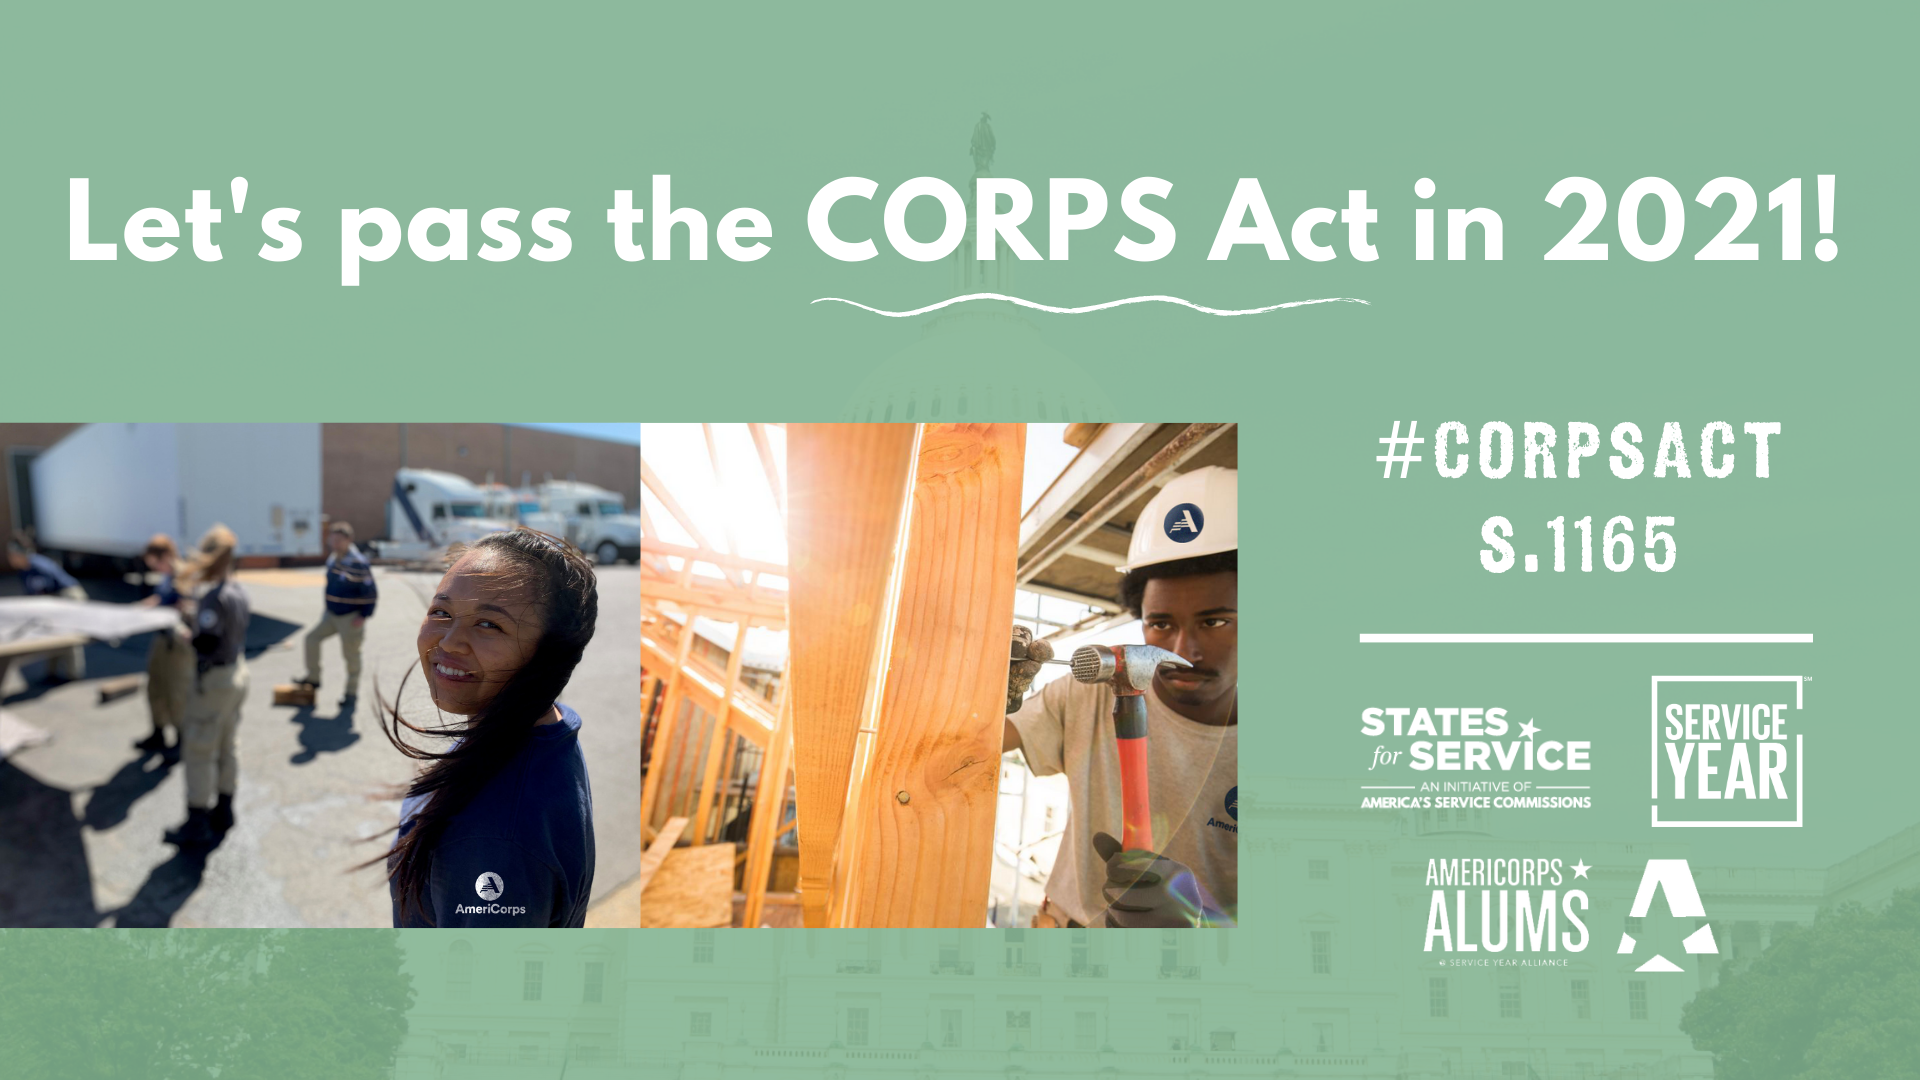 Green graphic with white text that reads Let’s pass the CORPS Act in 2021! #CORPSACT S.1165 Includes States for Service logo, Service Year logo, The Corps Network logo, AmeriCorps Alums logo. Includes two photos of AmeriCorps members serving.